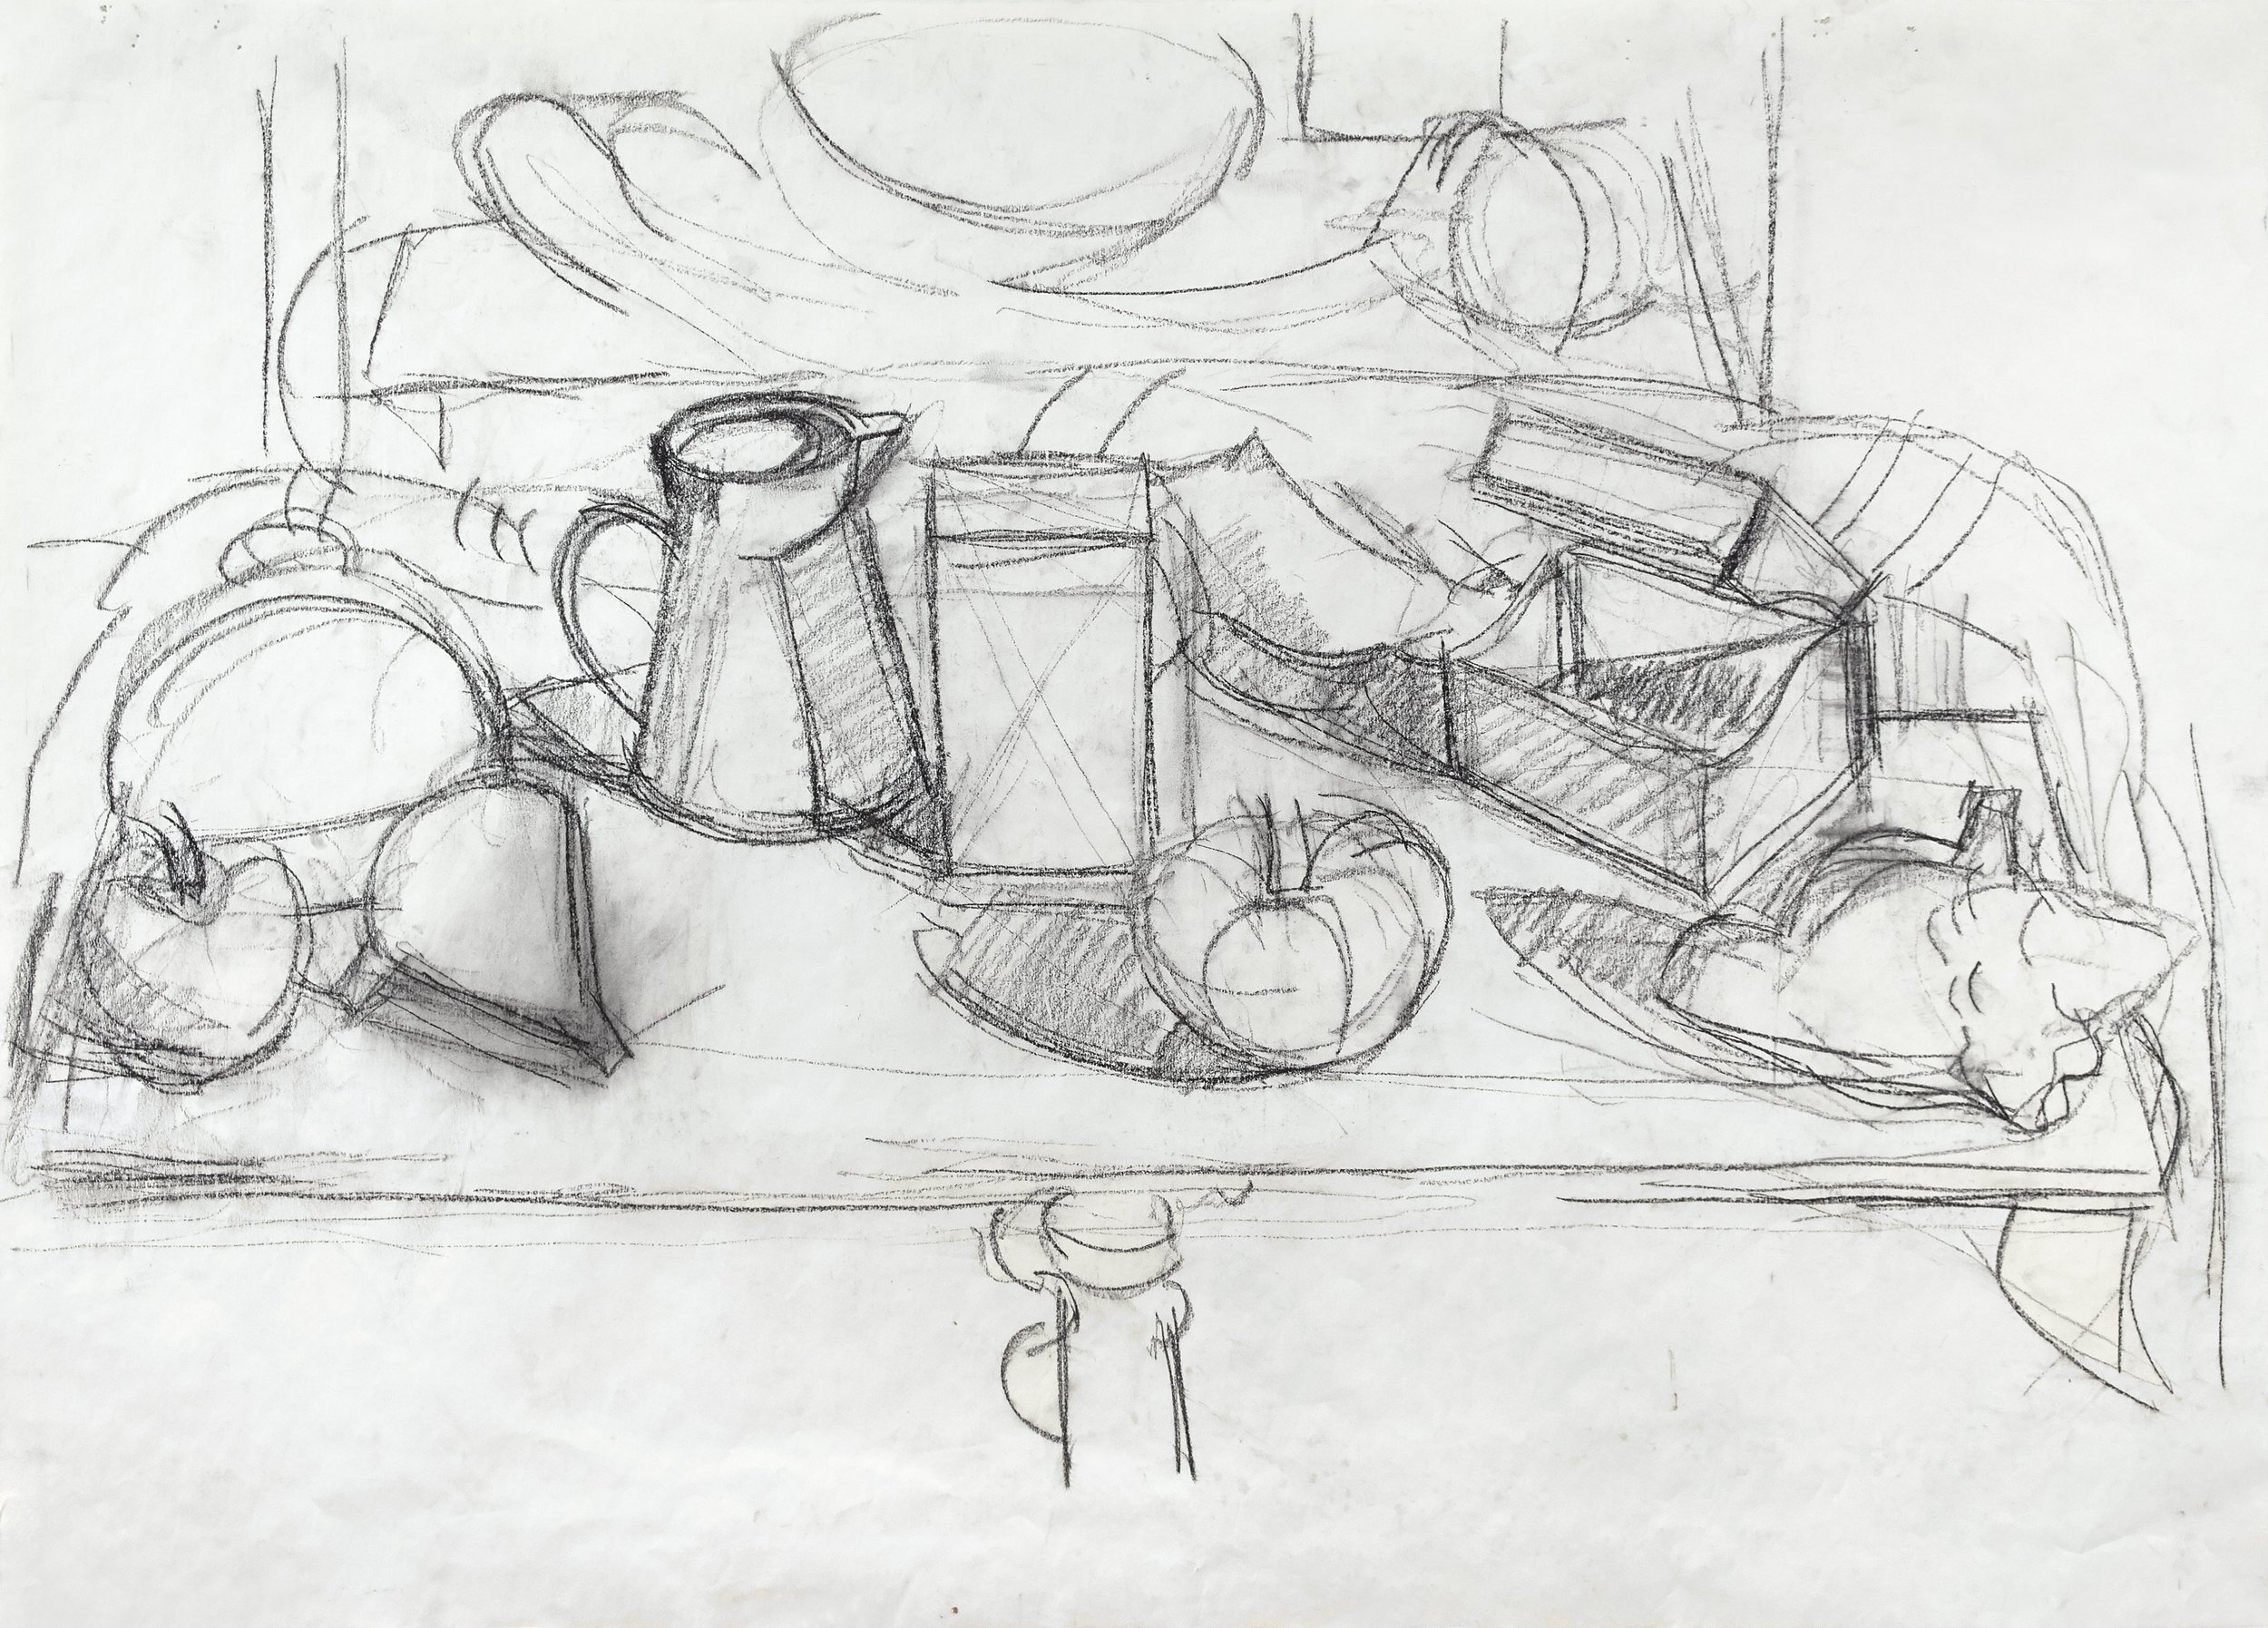   Pudding Mold and My New Box (study) , 2006, charcoal on paper unmounted, 25” x 37”, $500 